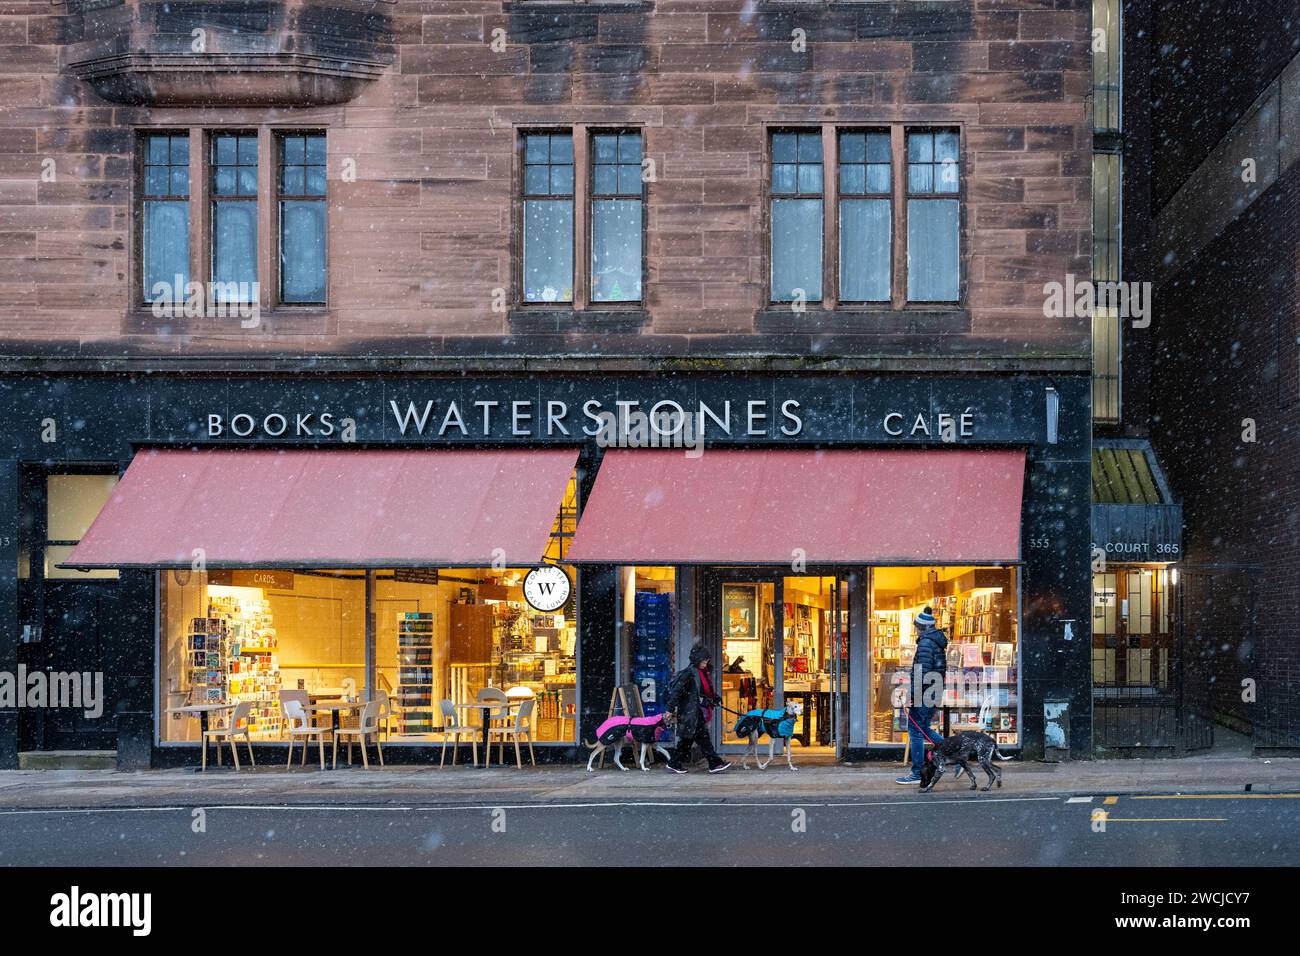 Waterstones bookstore shop and cafe exterior and interior in winter - Byres Road, Glasgow, Scotland, UK Stock Photo